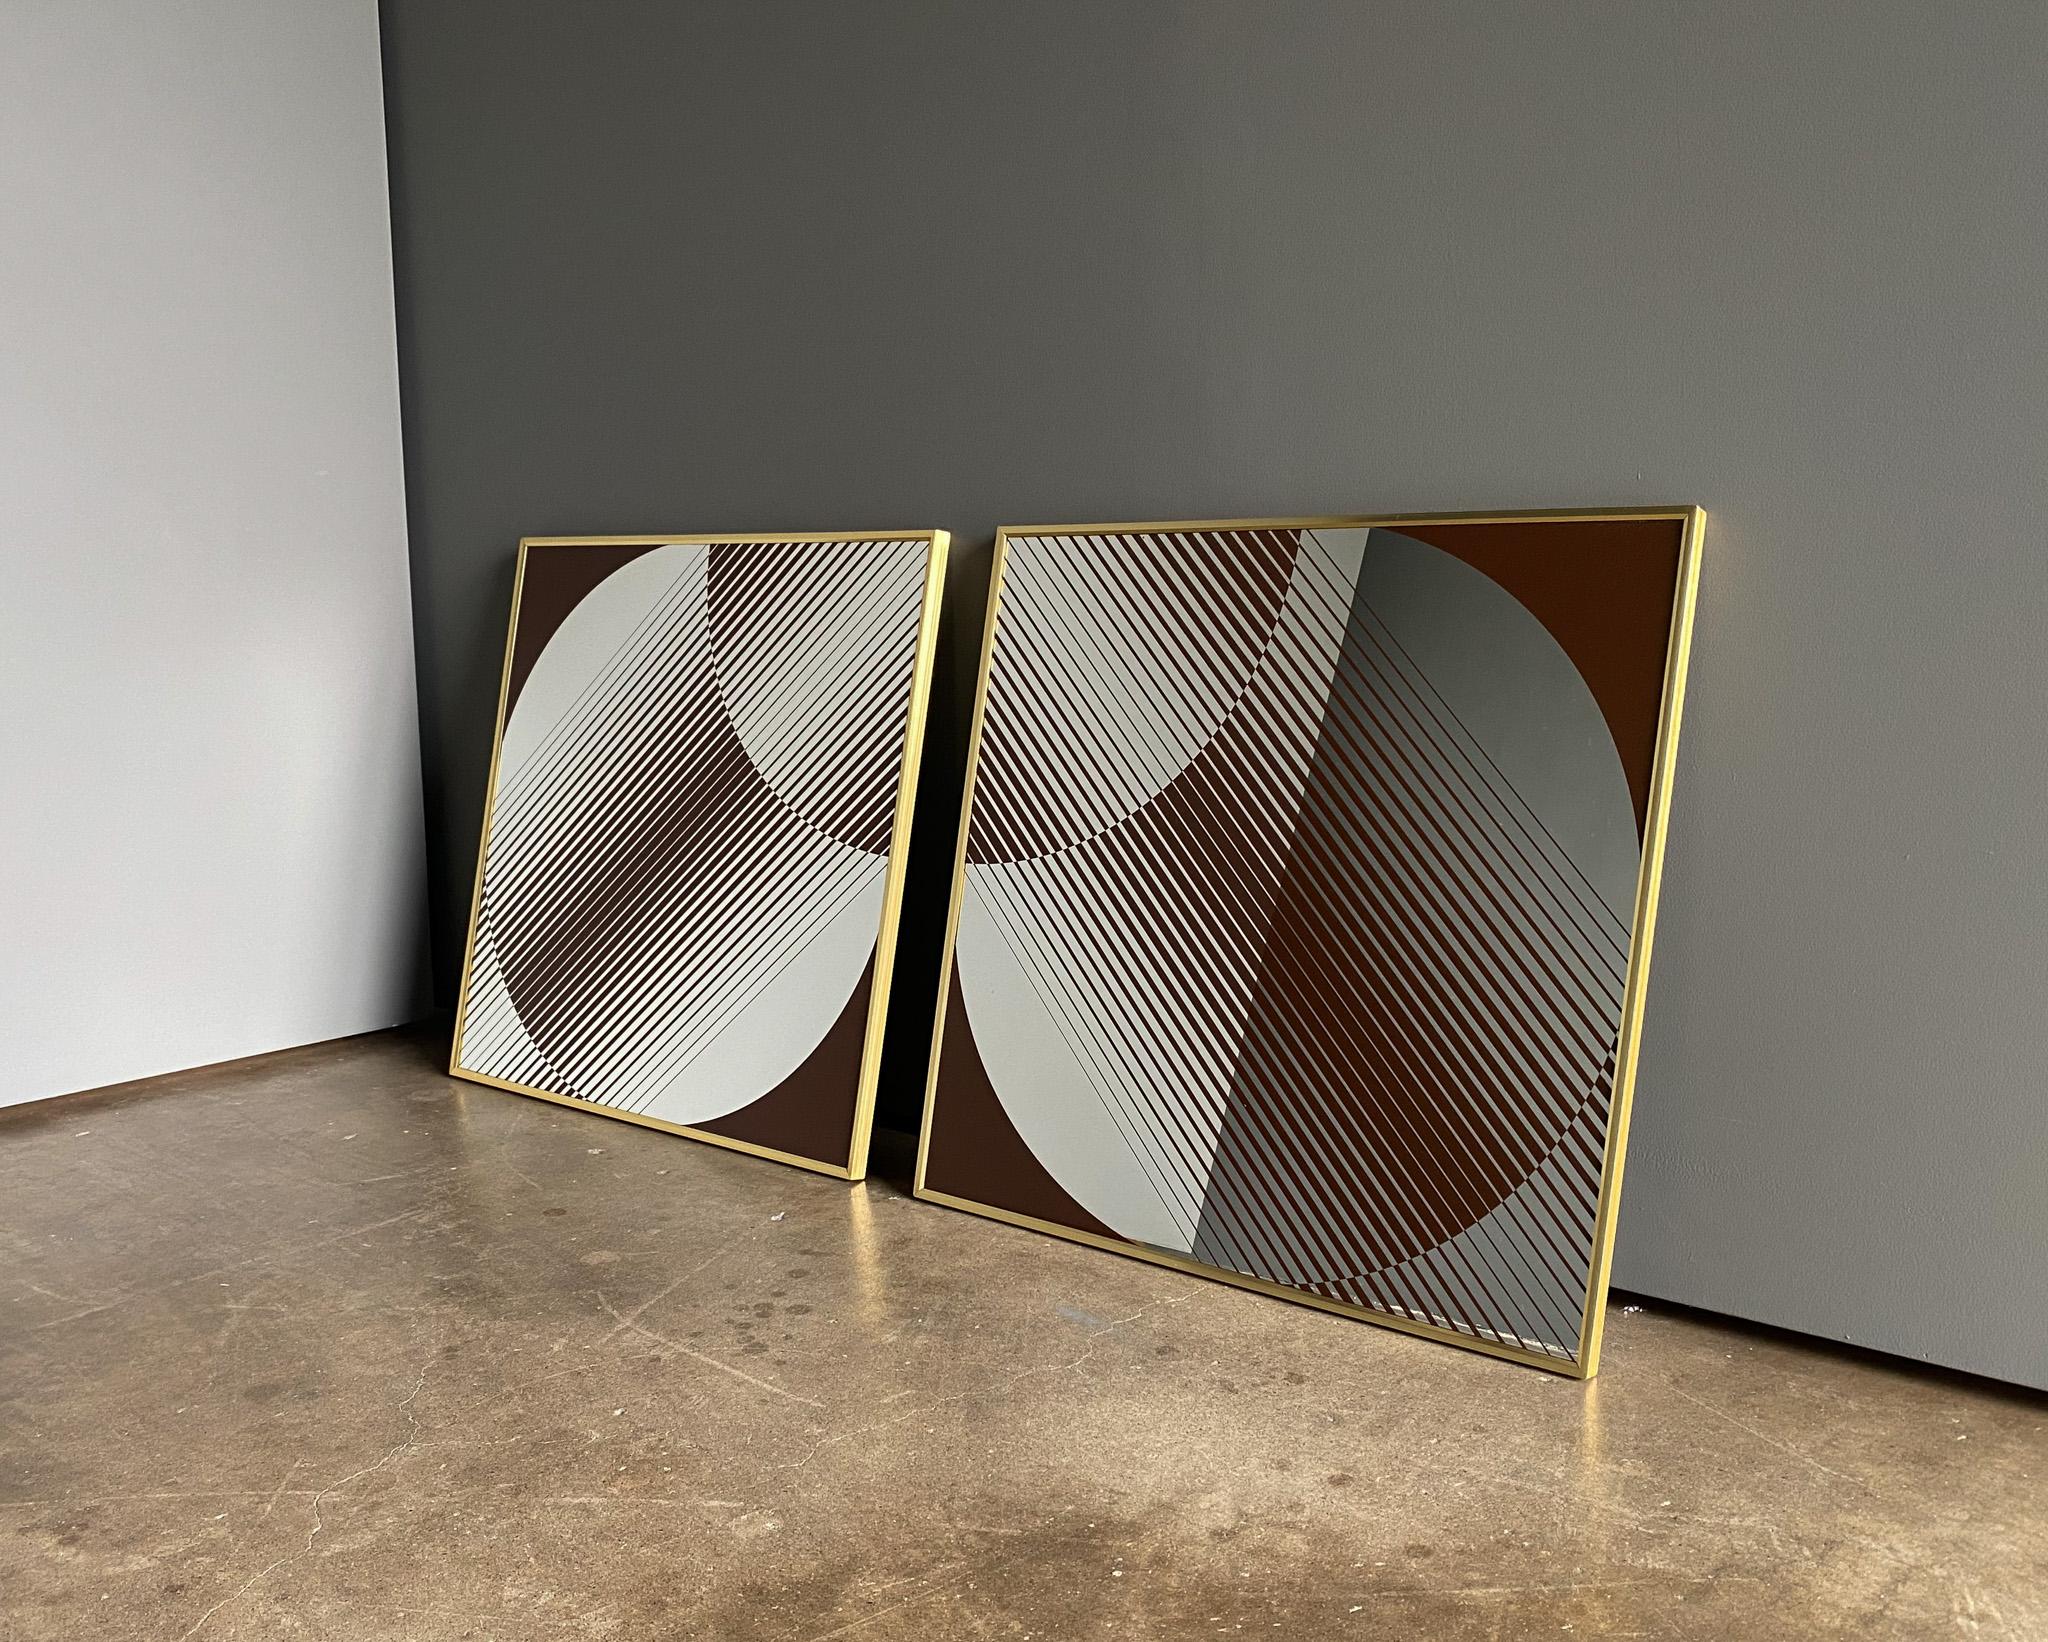 Turner Op Art Abstract Wall Mirrors, United States, 1970's.  The listed price is for the pair.  